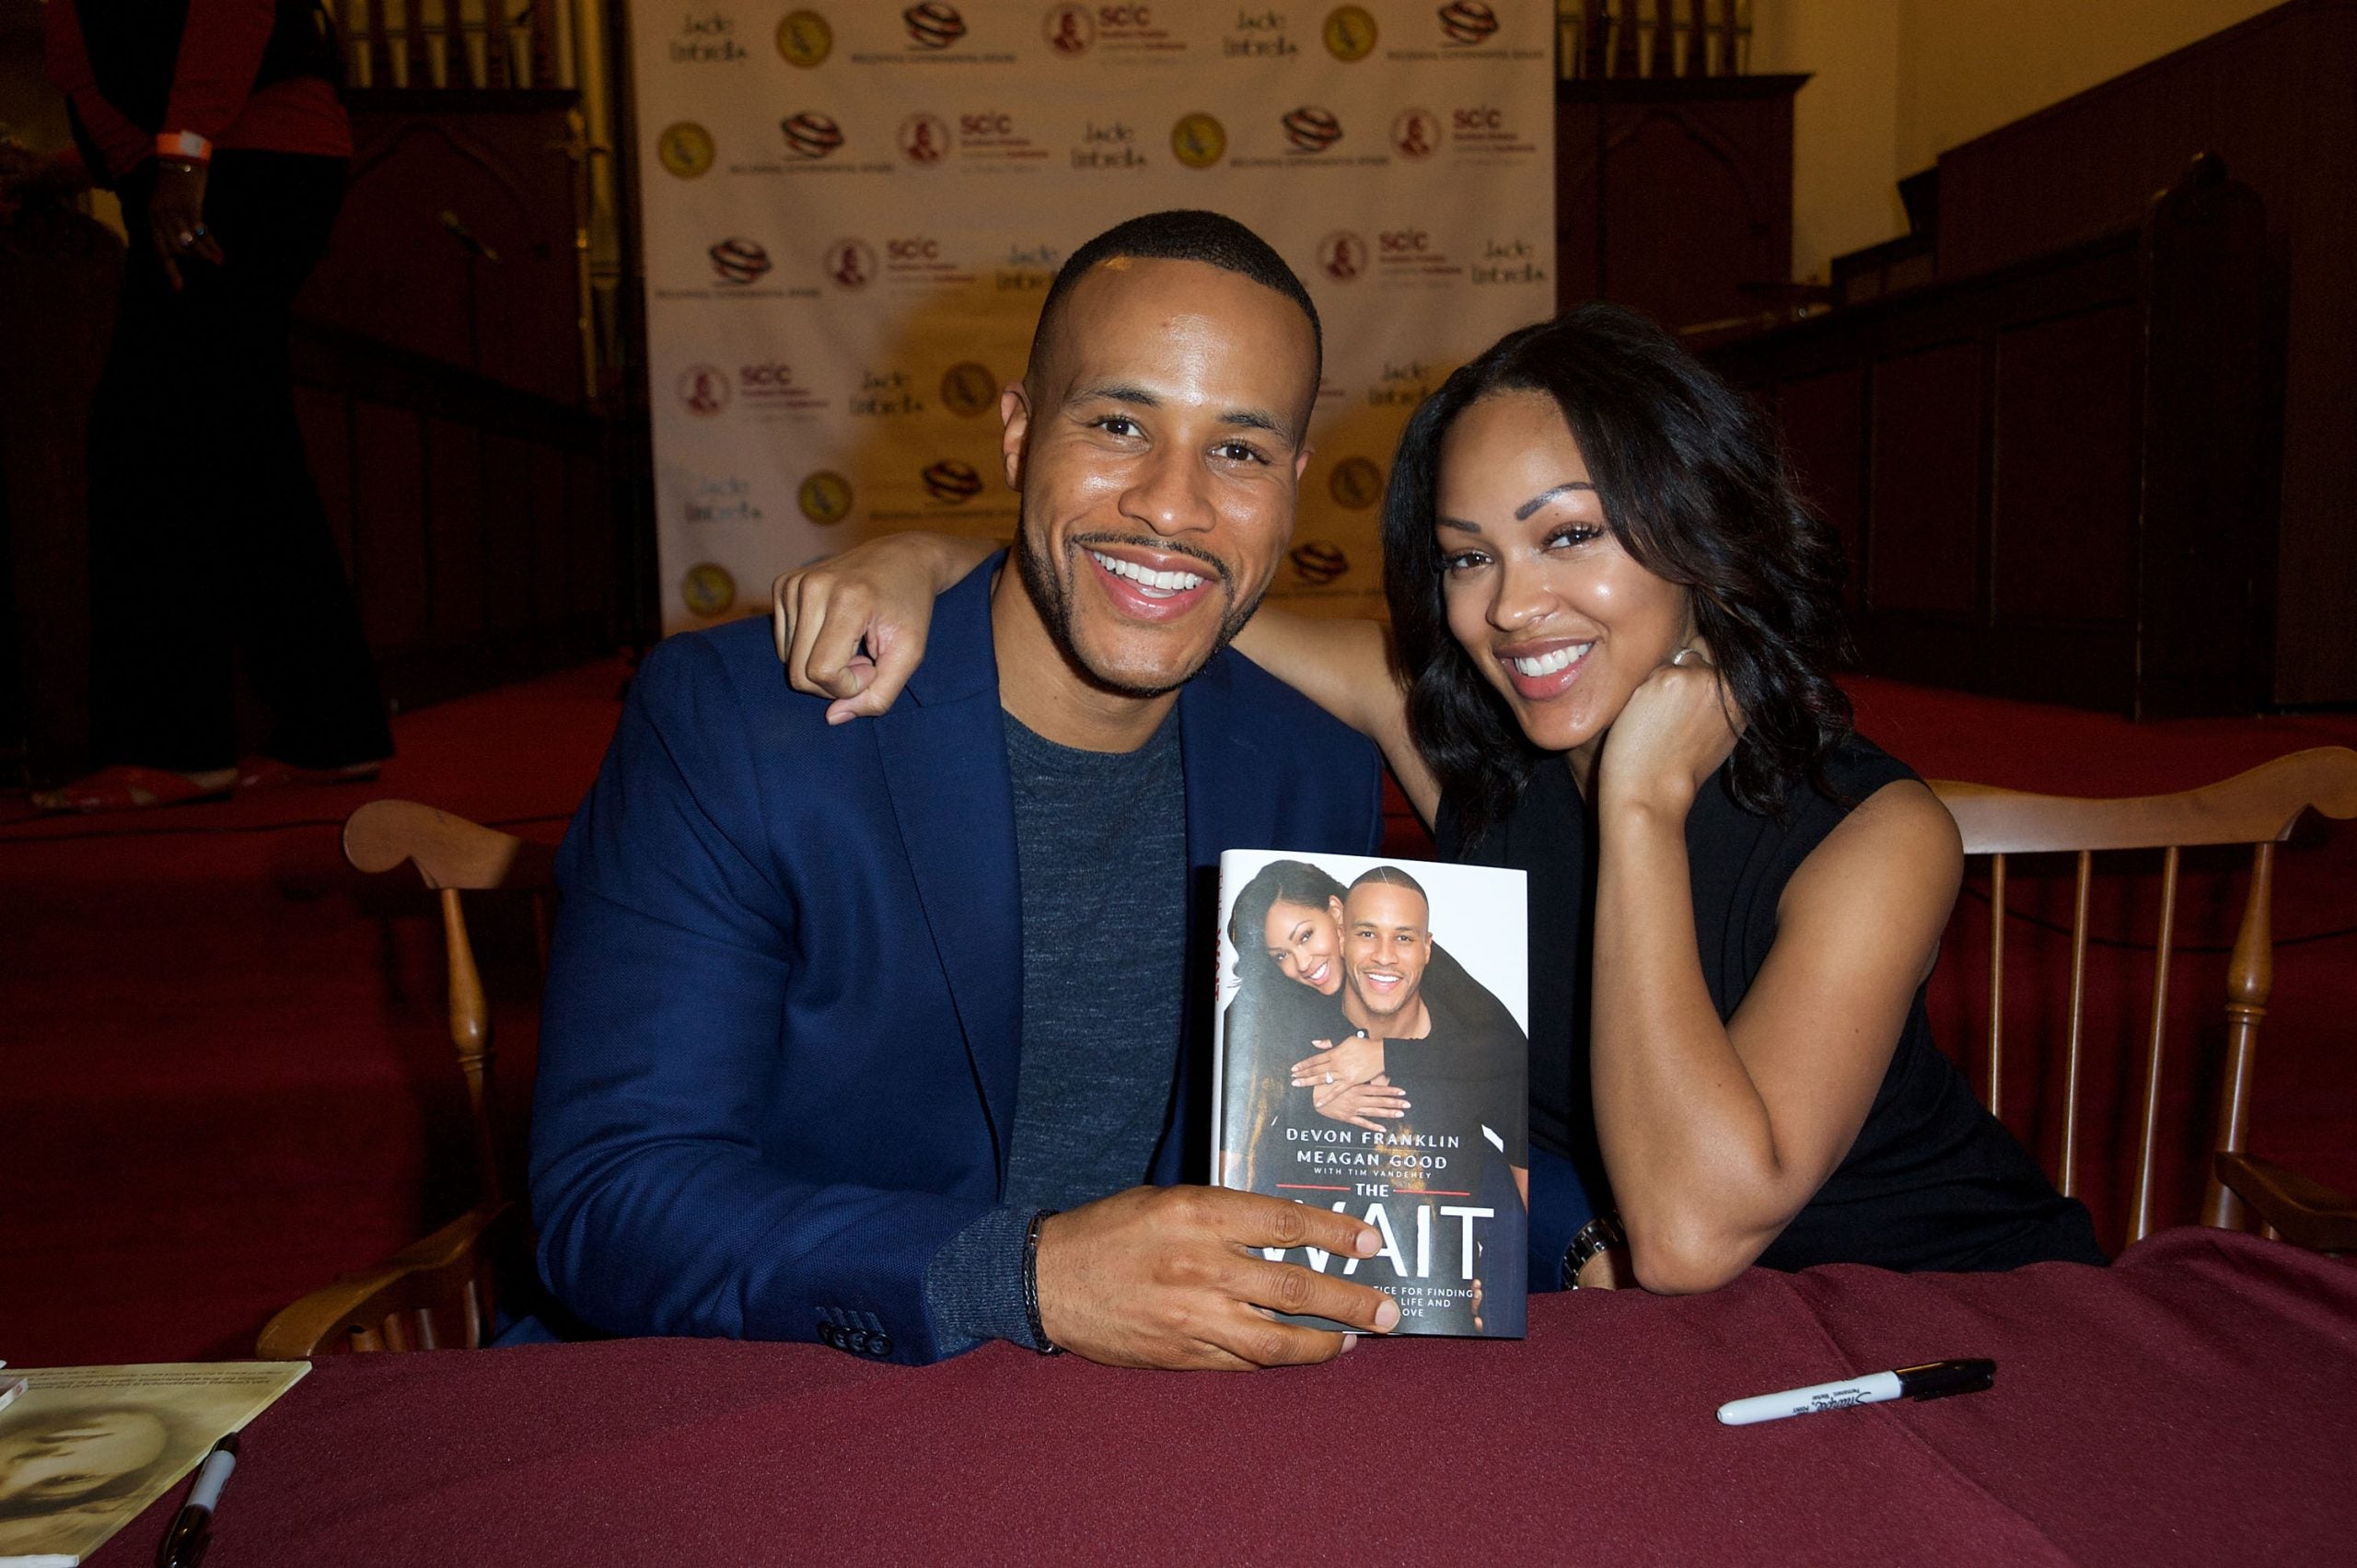 Meagan Good And DeVon Franklin Split After 9 Years Of Marriage: A Timeline Of Their Relationship